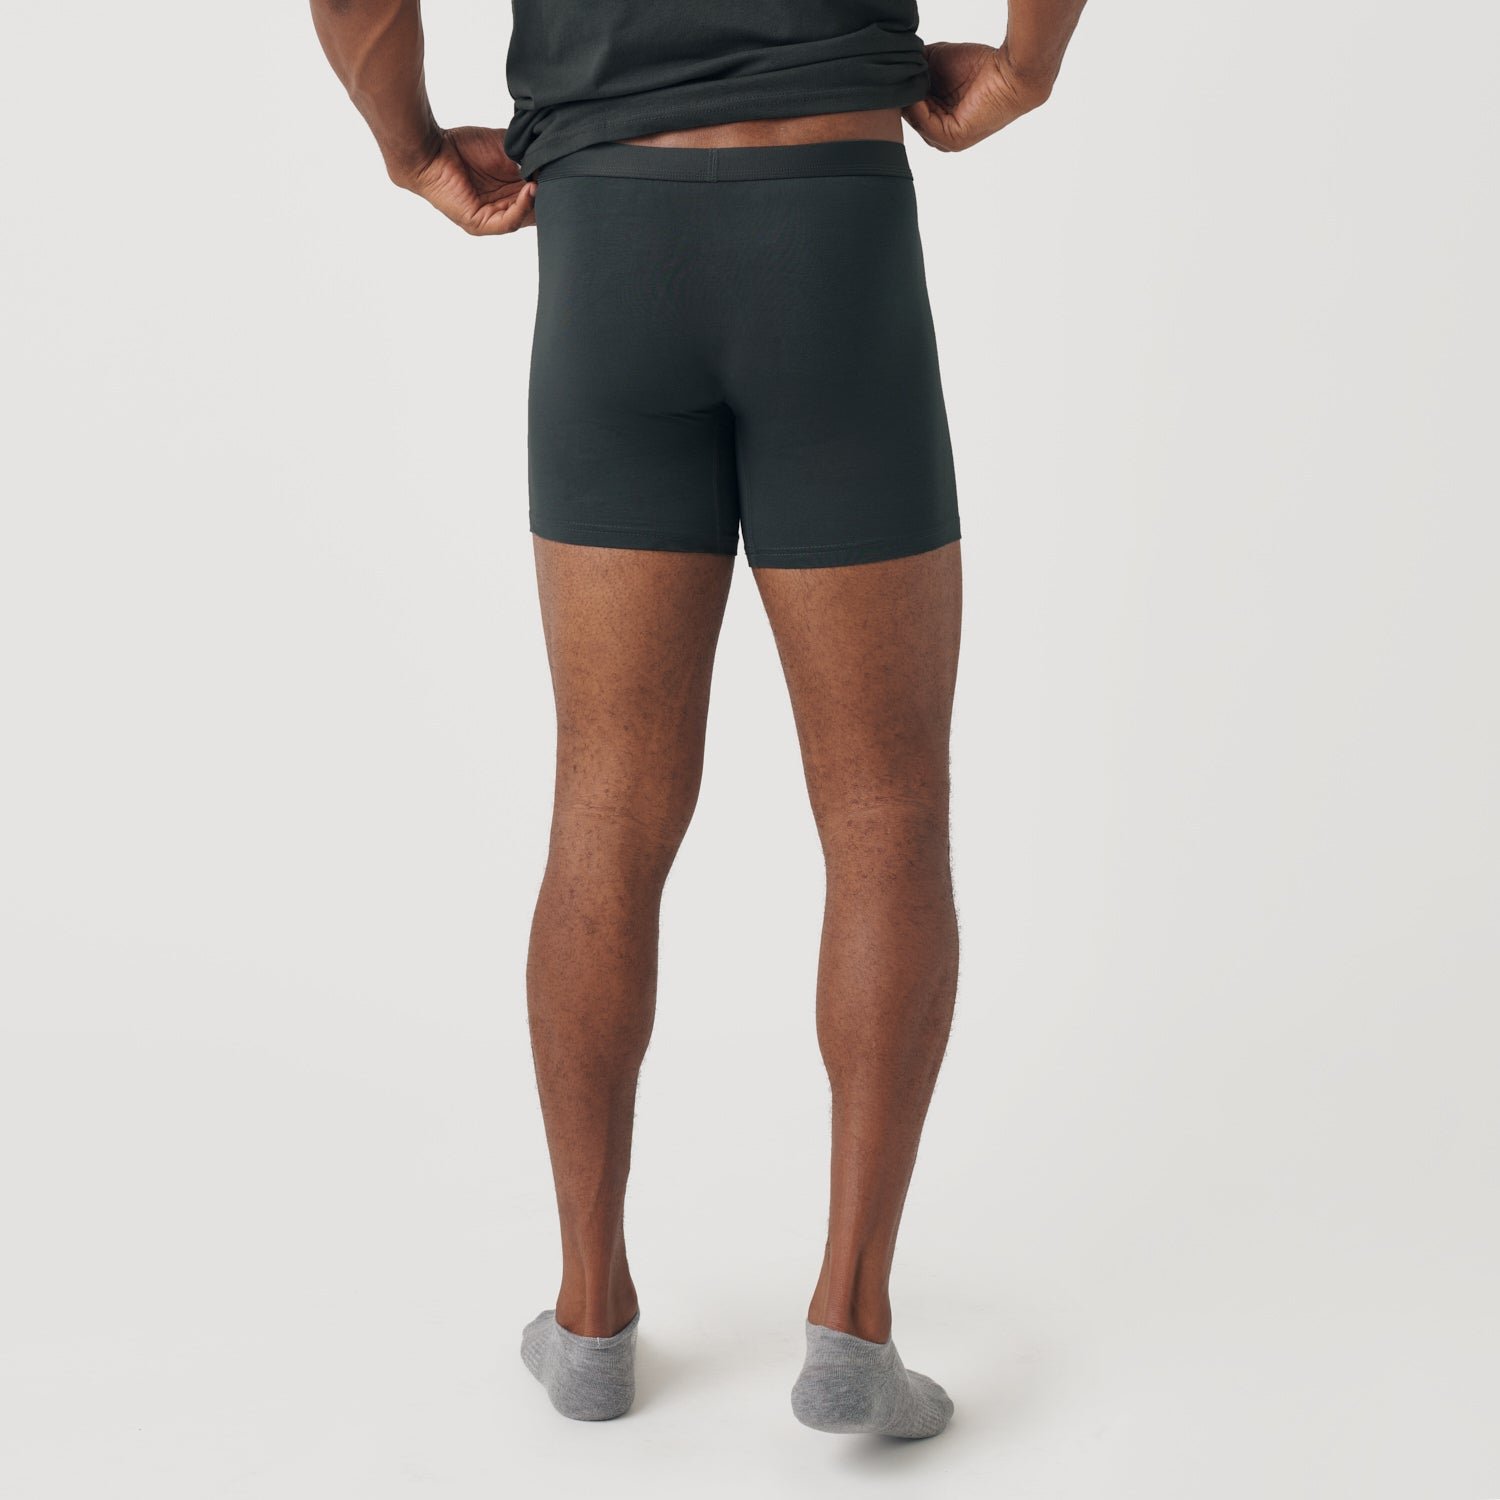 The Carbon Briefs 3-Pack